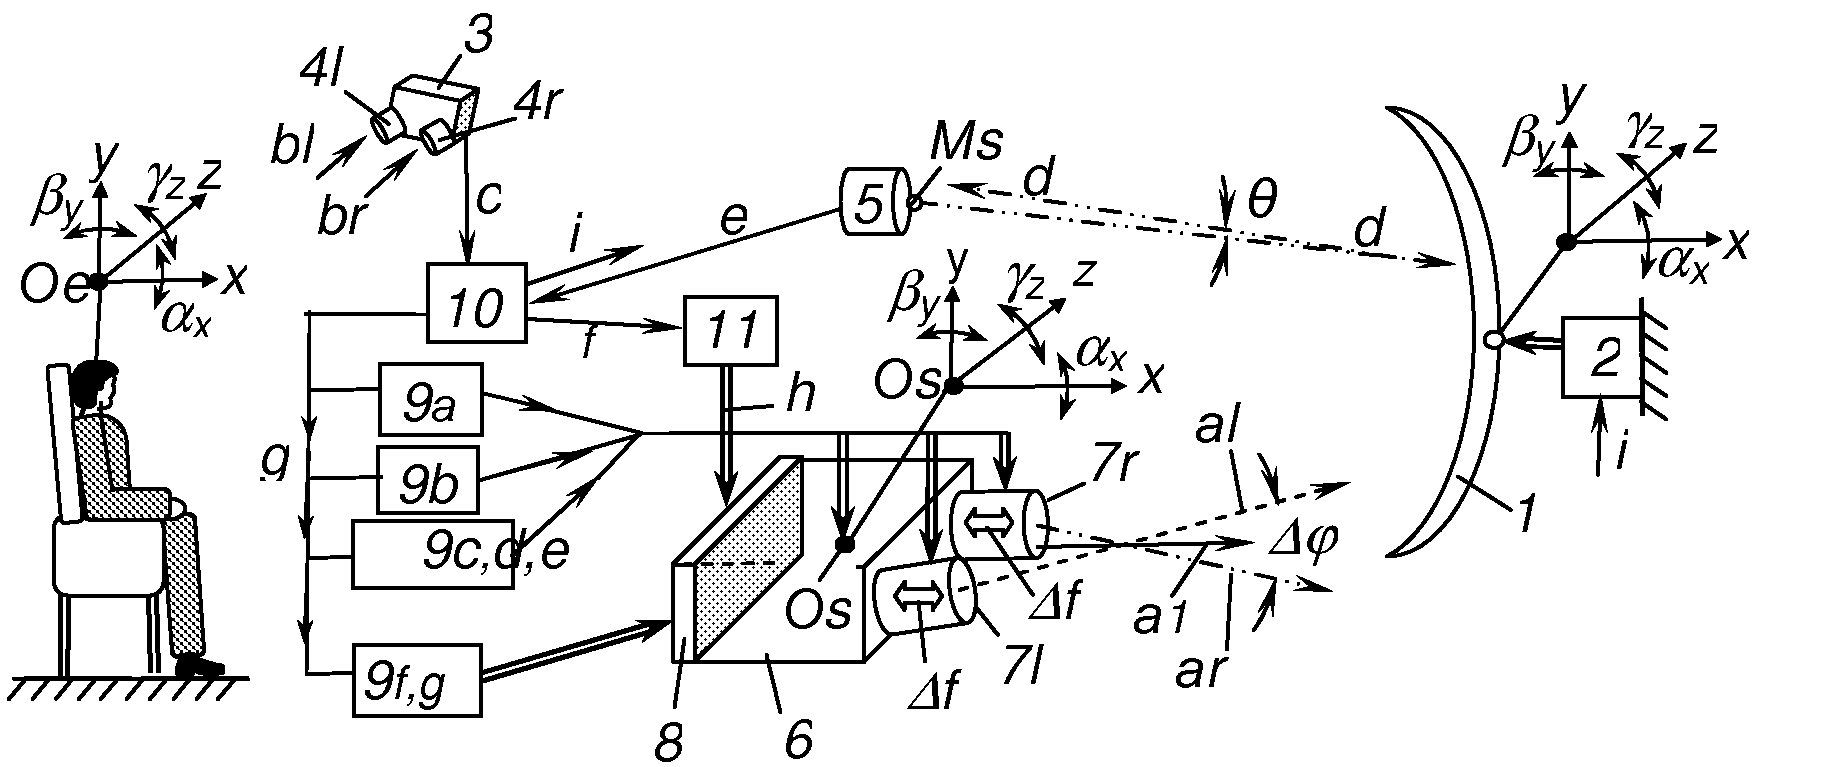 Stereoprojection system